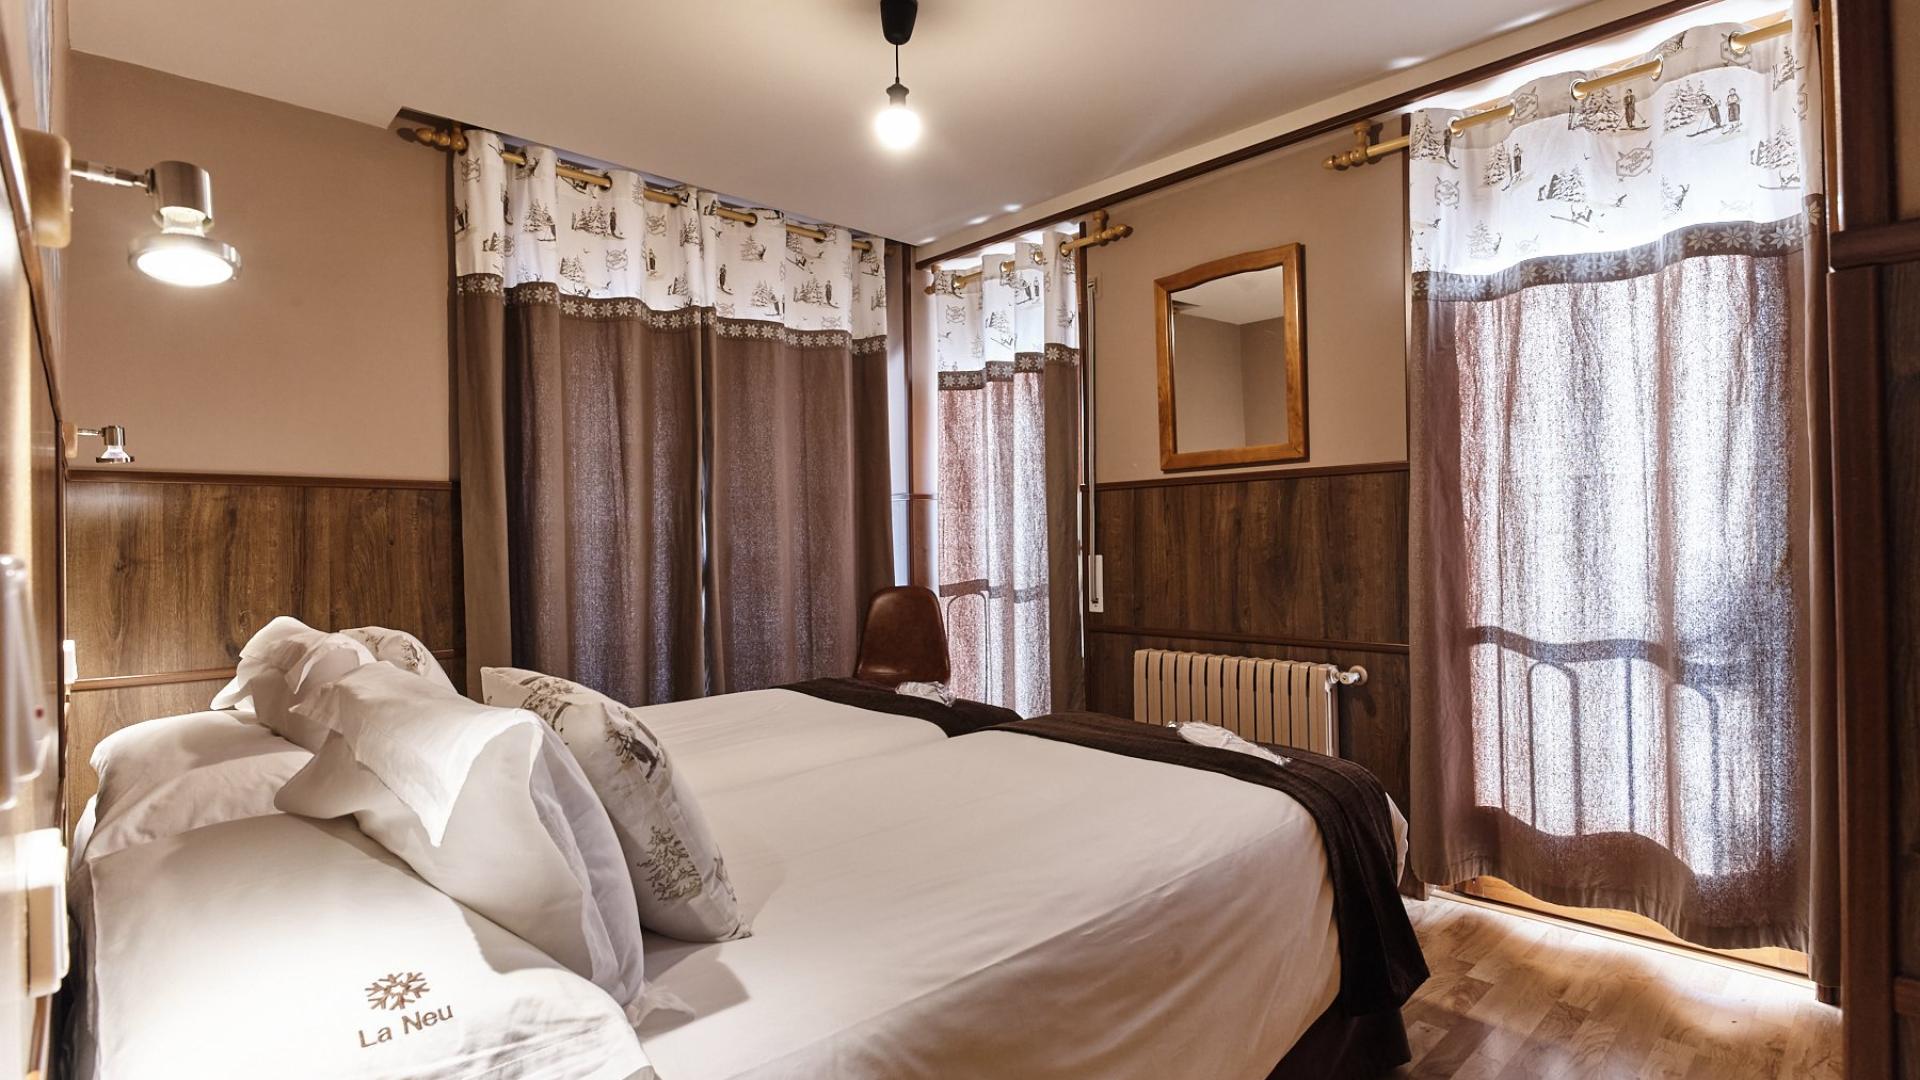 Apartments in the heart of Ordino!